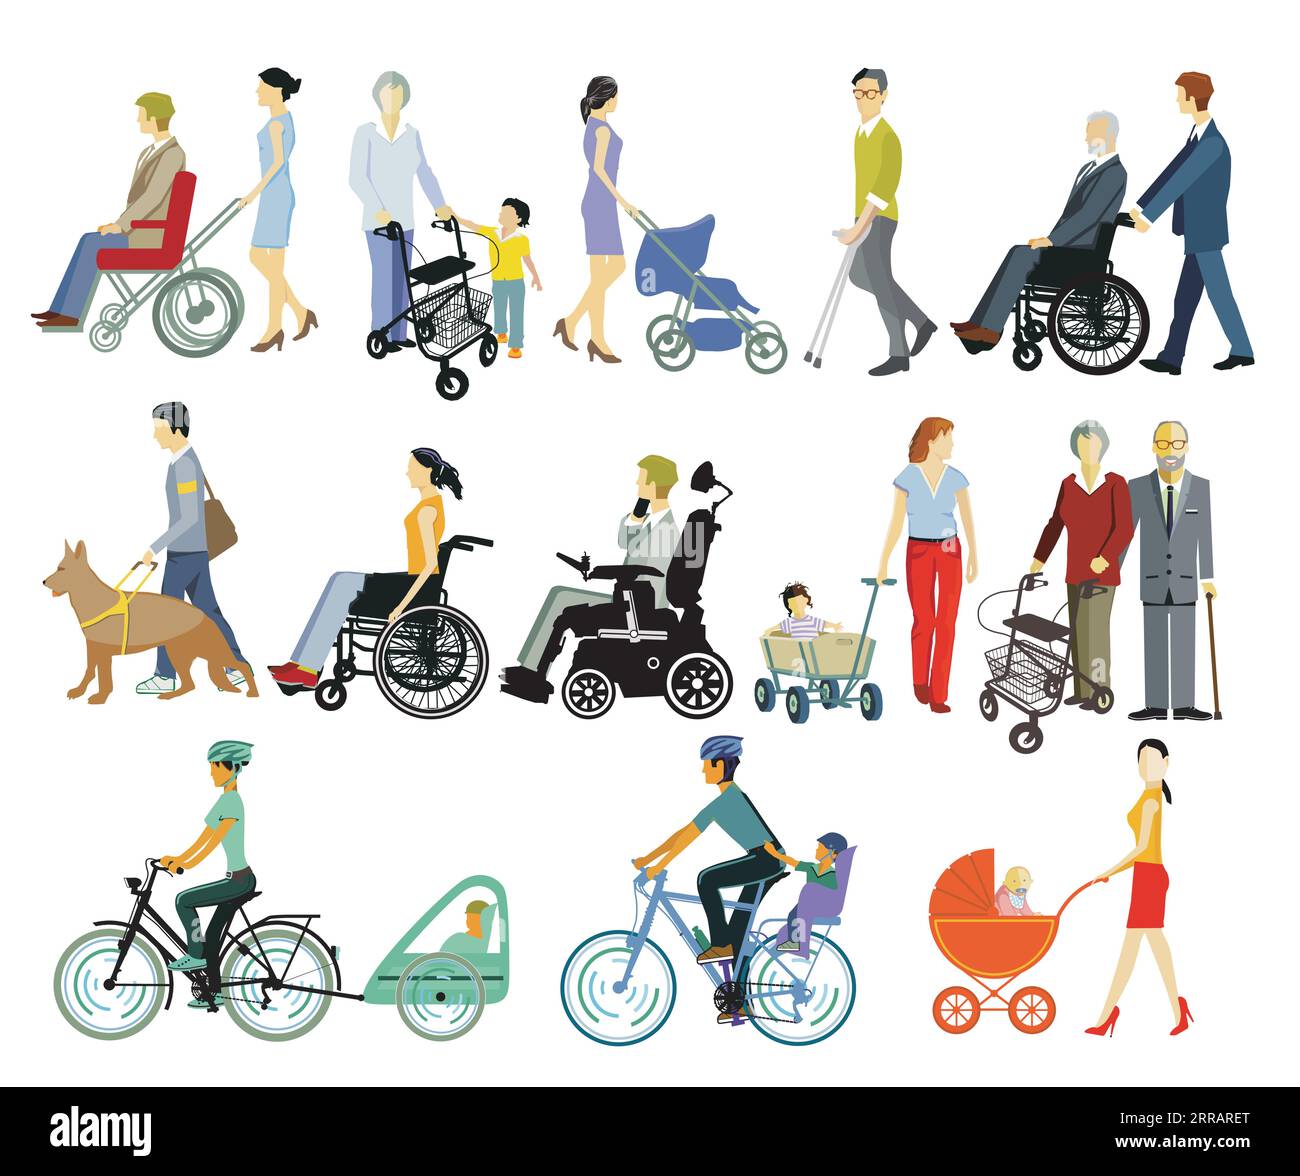 Group of people with disabilities and walking aids, isolated Stock Vector